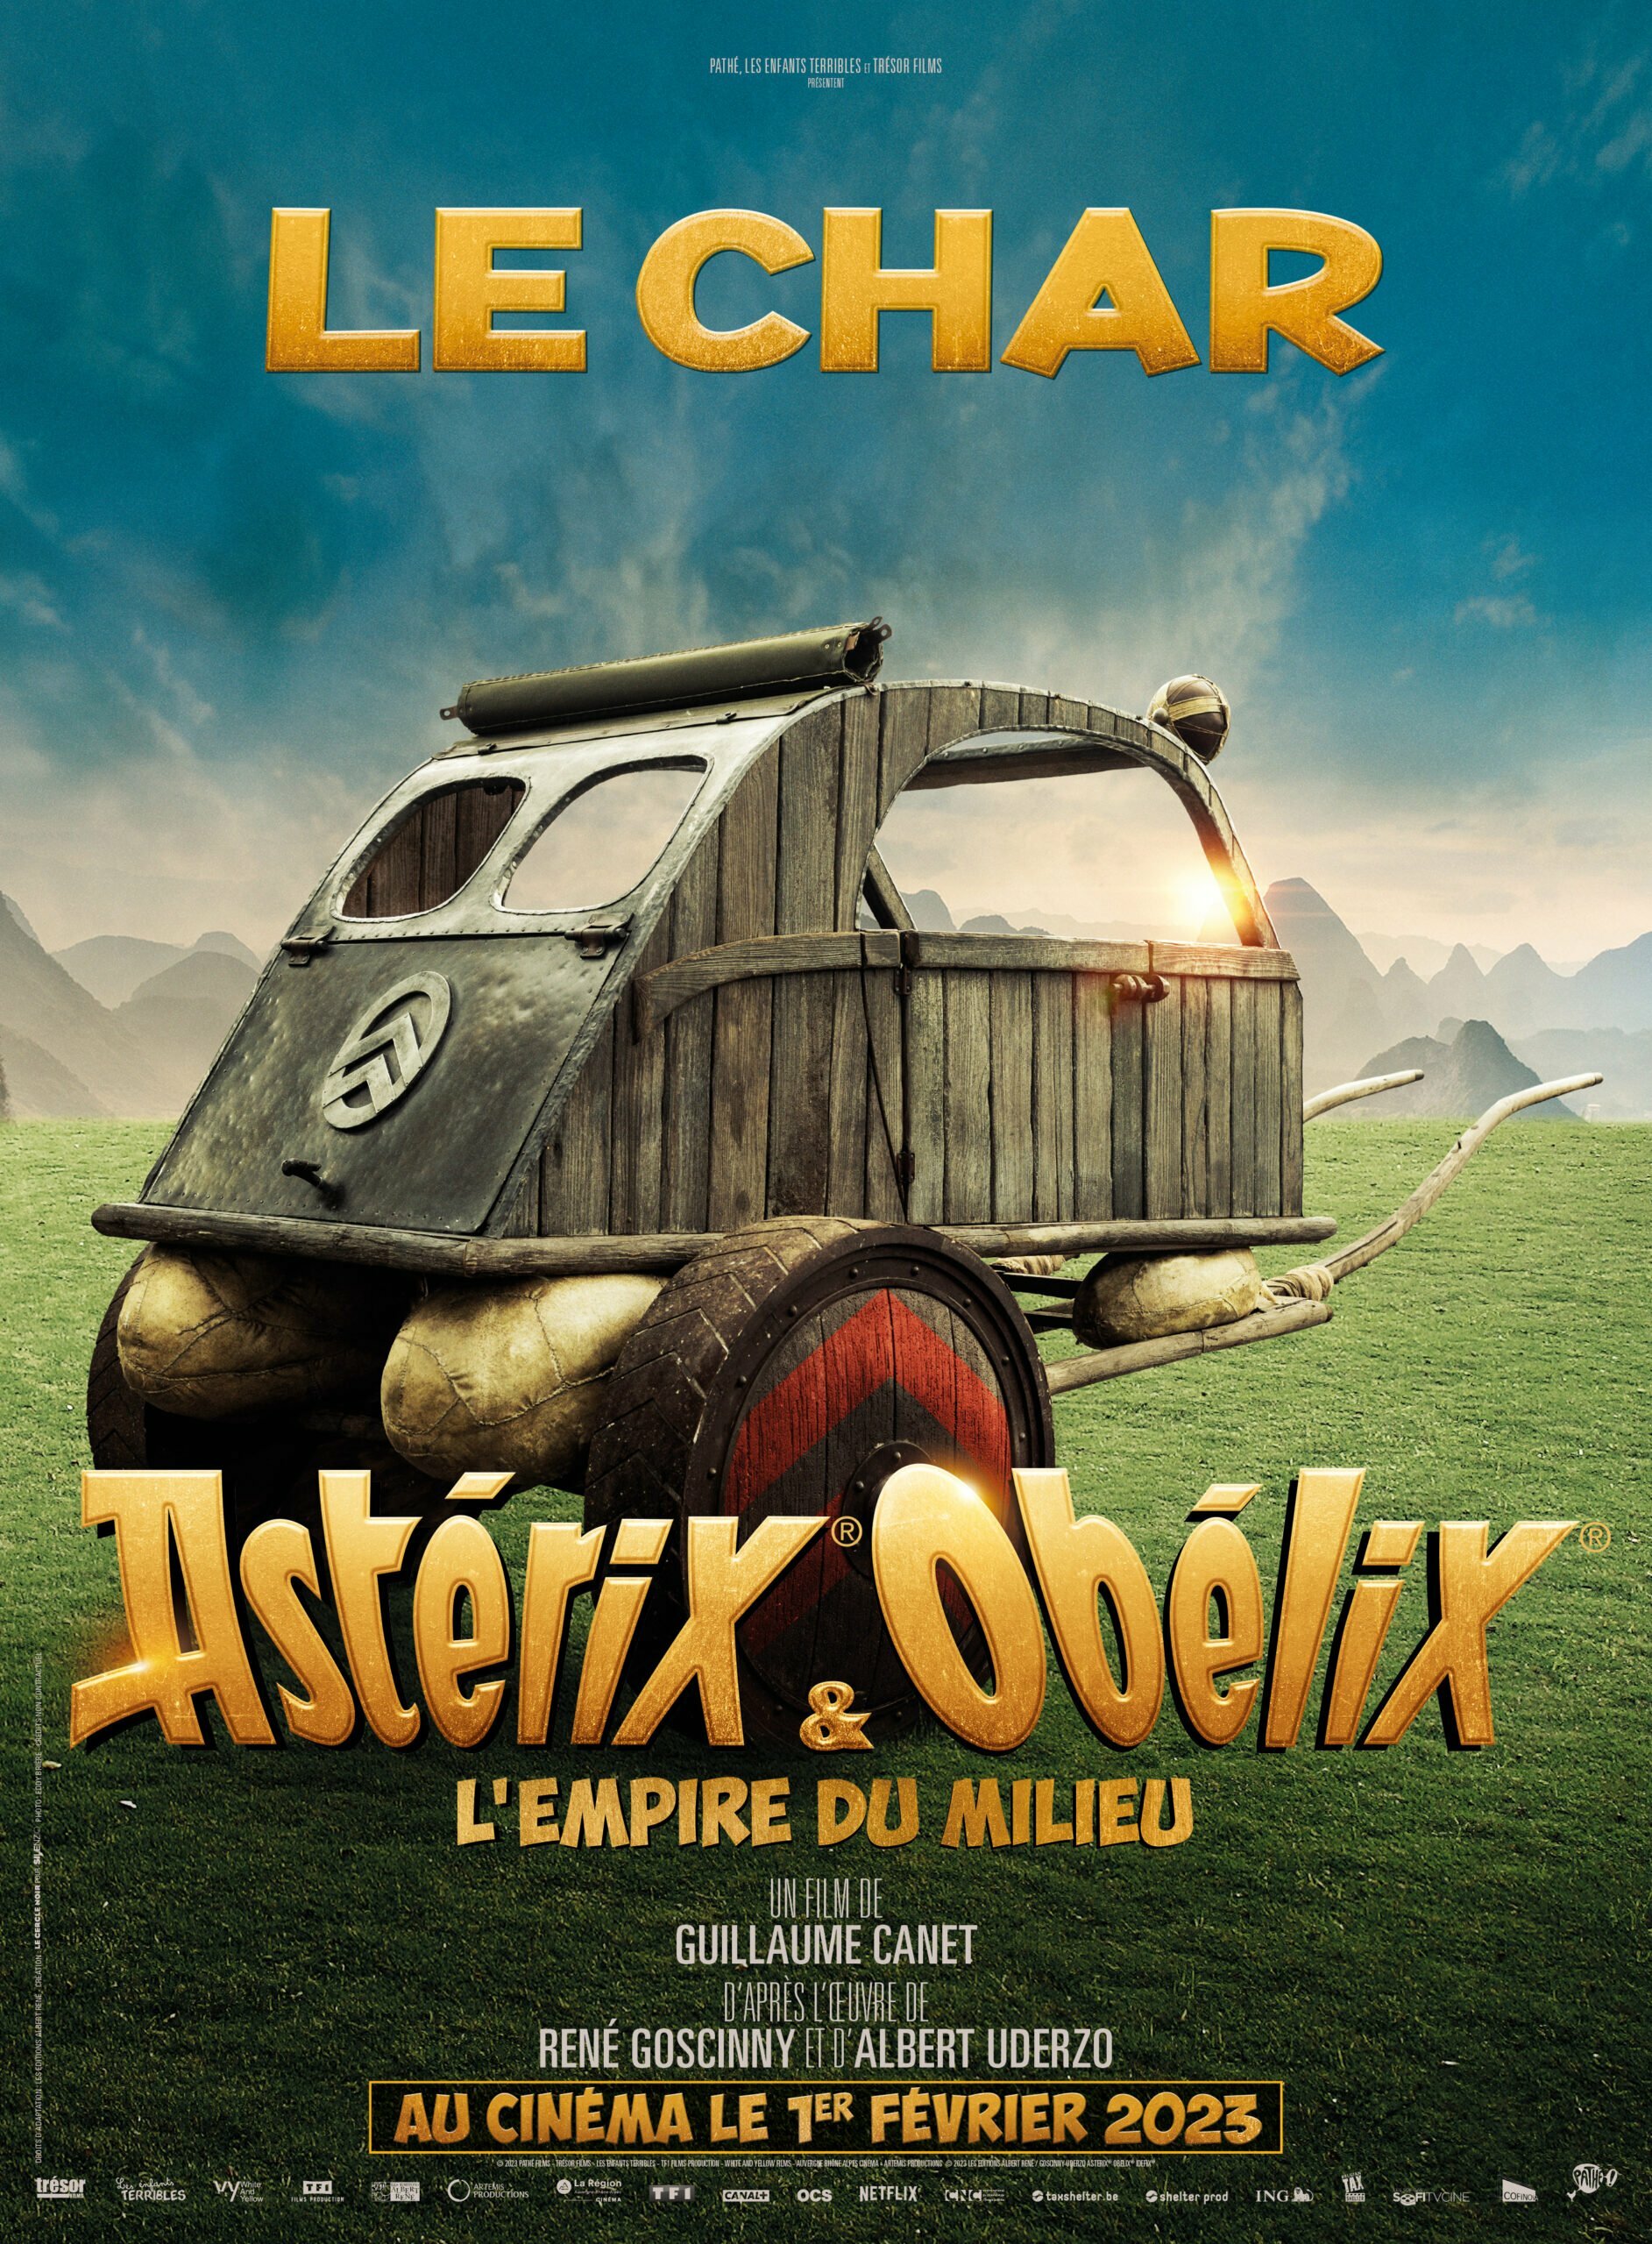 Watch The Iconic Citroen 2CV In Upcoming Movie Asterix& Obelix (2)